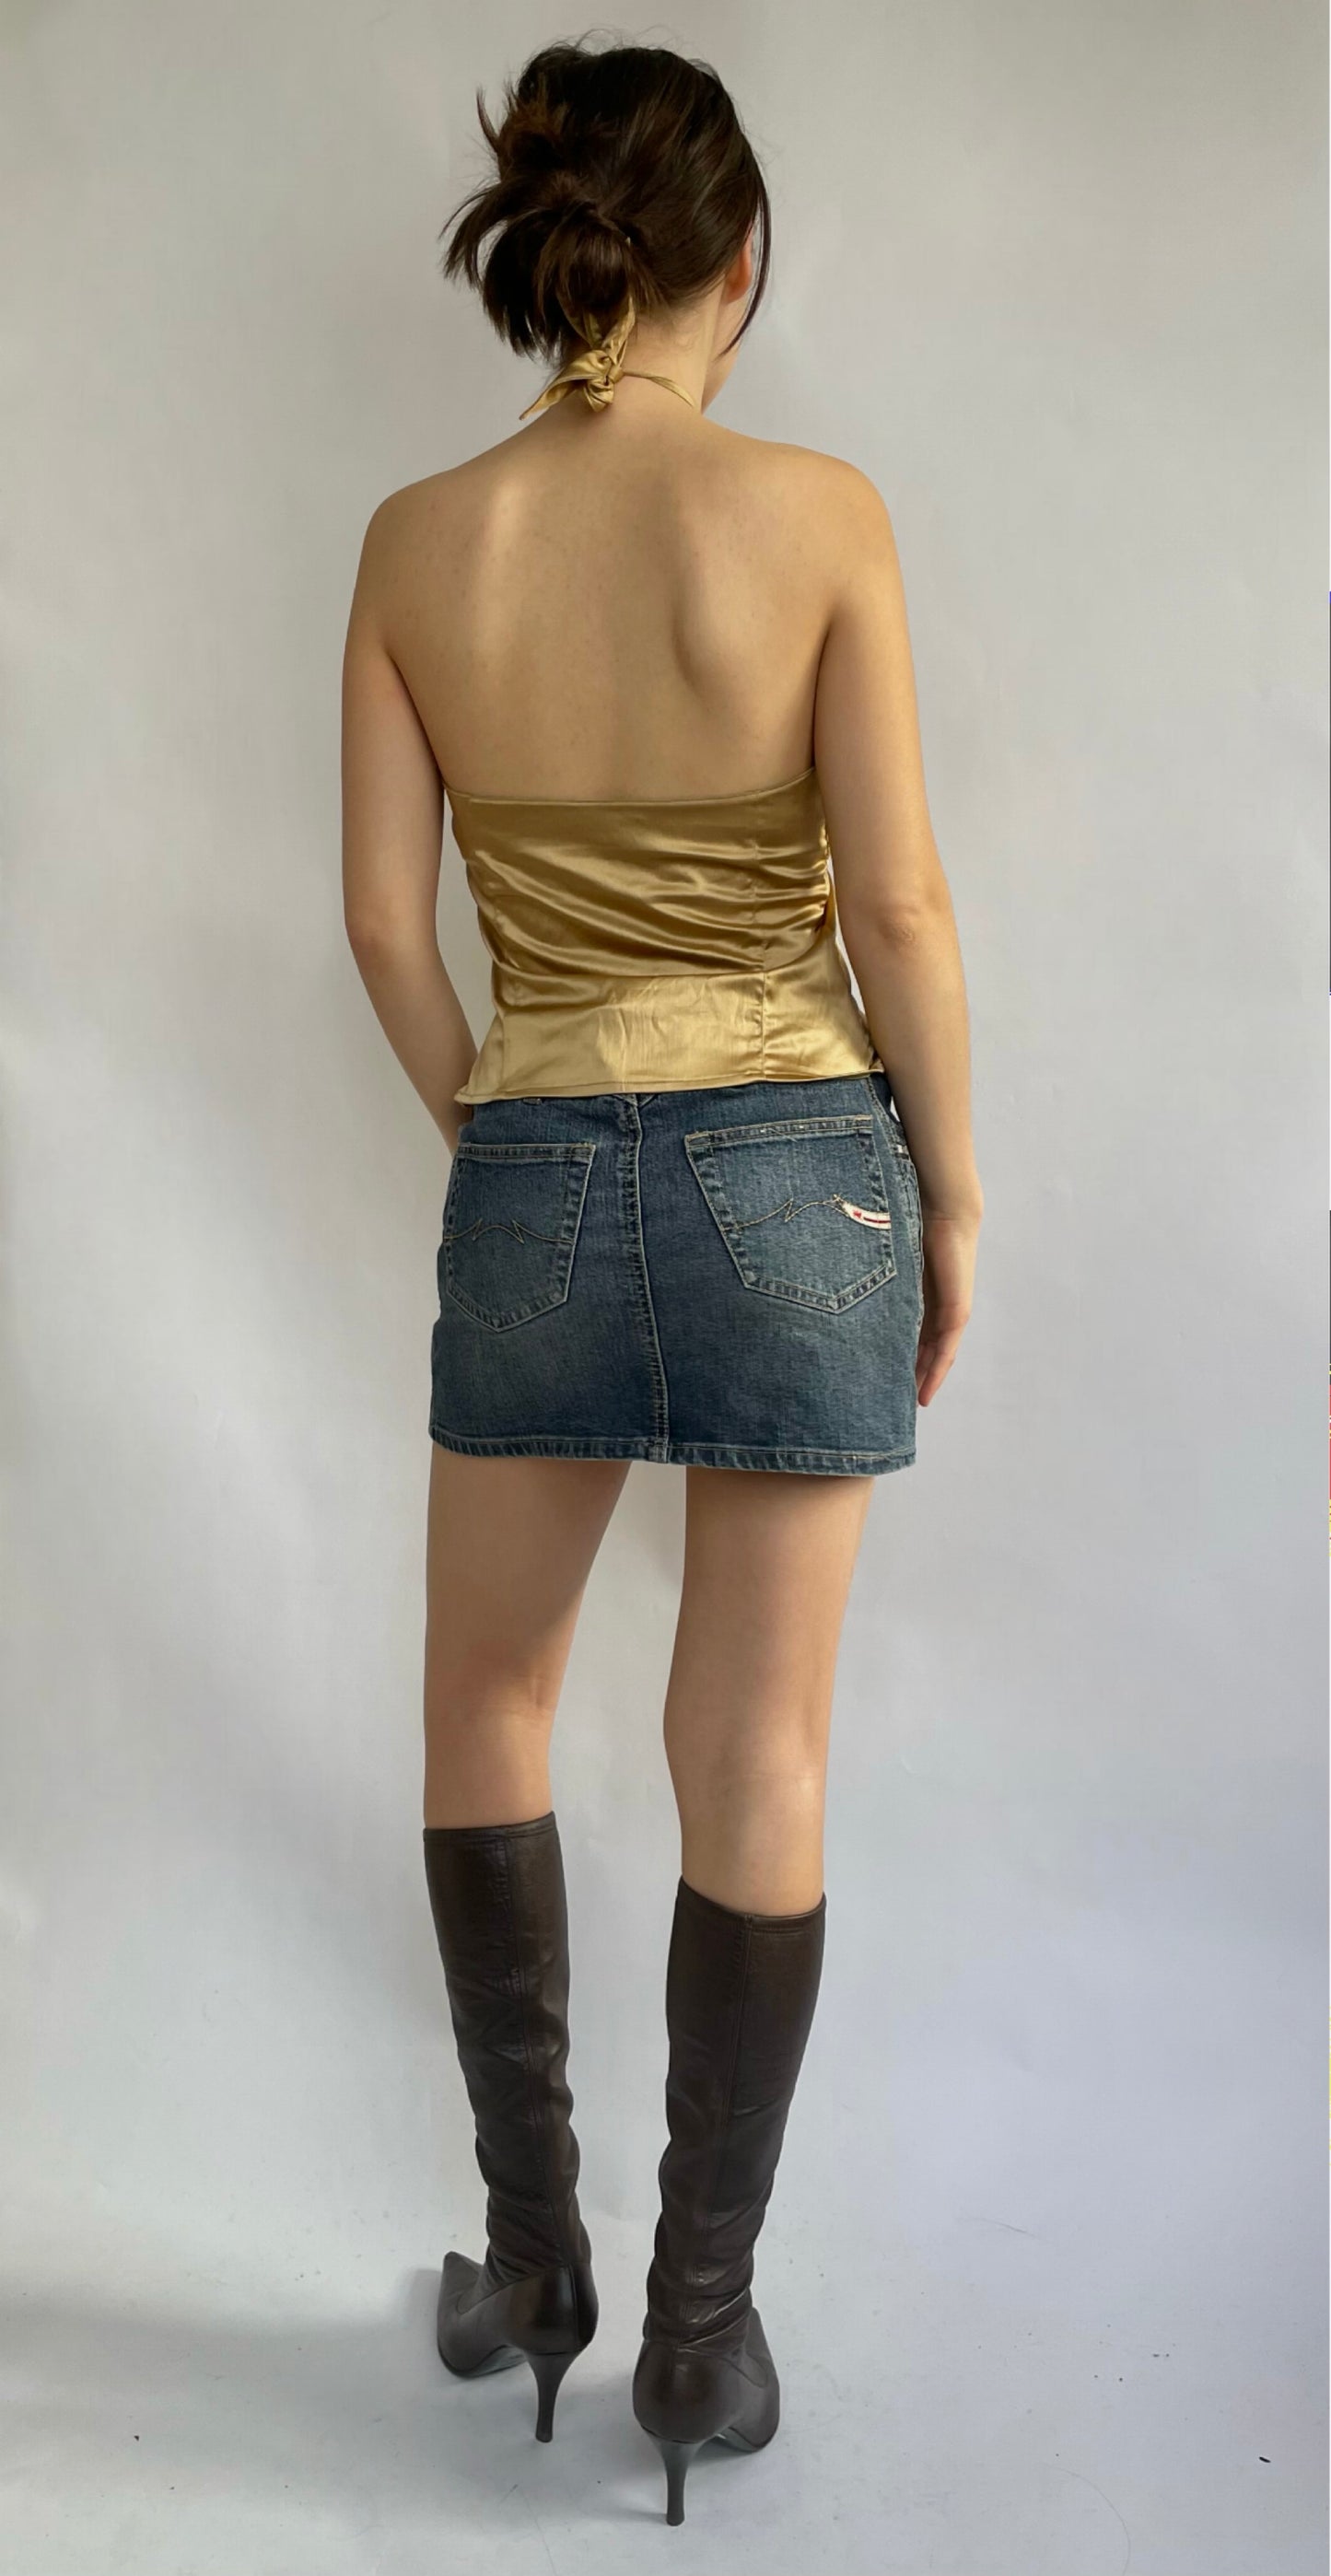 Early 2000s gold satin top